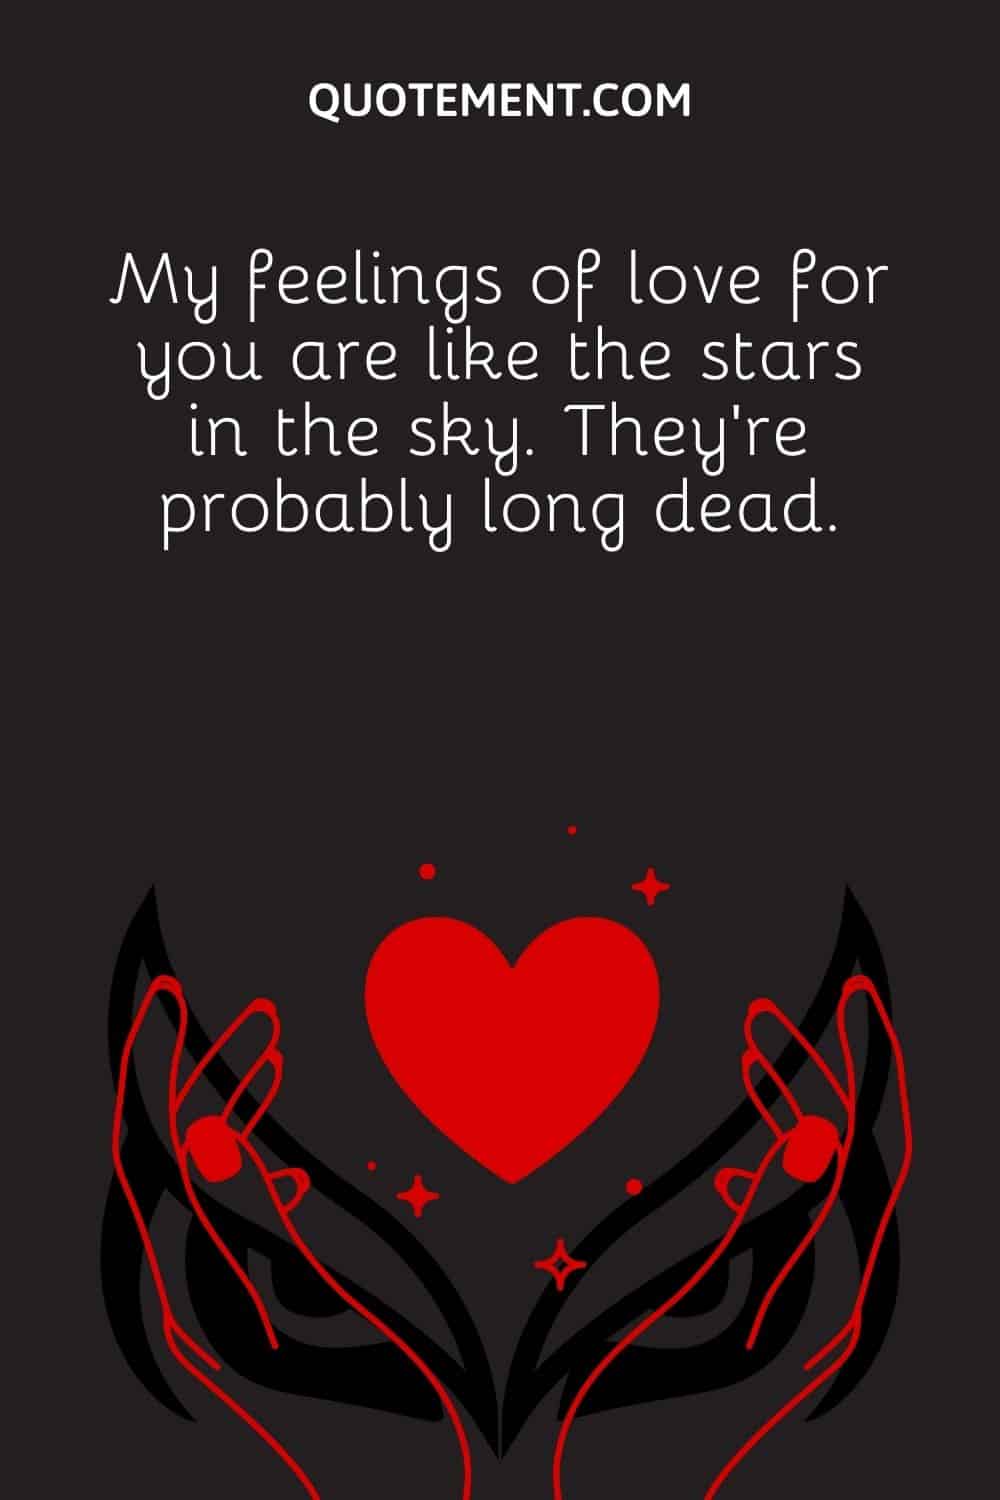 My feelings of love for you are like the stars in the sky